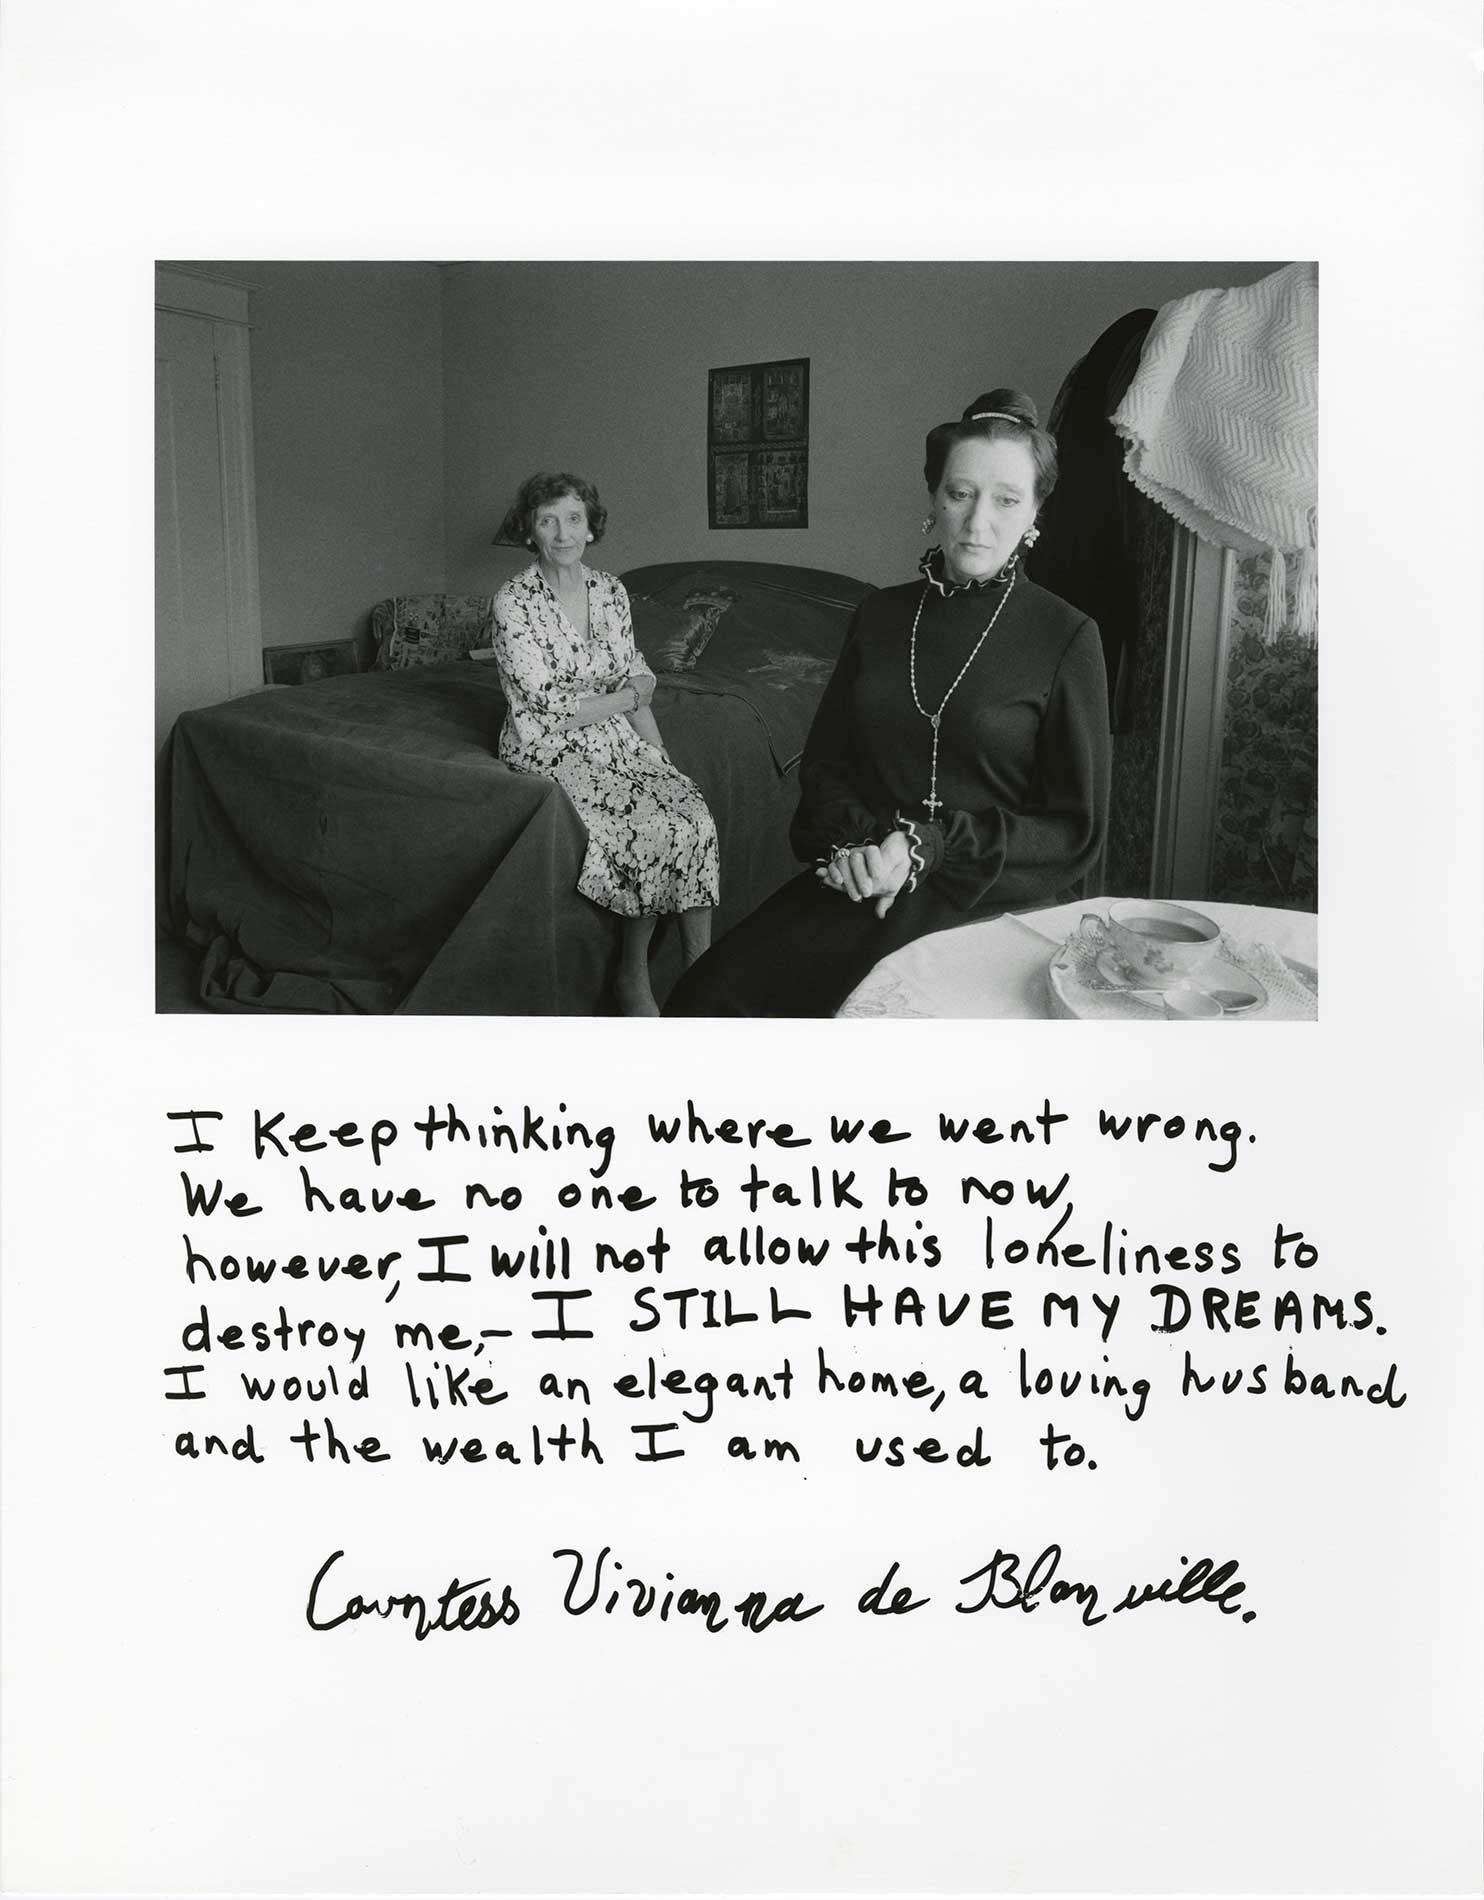 A photograph of two women, one older, one younger, with hand-writing overtop the image